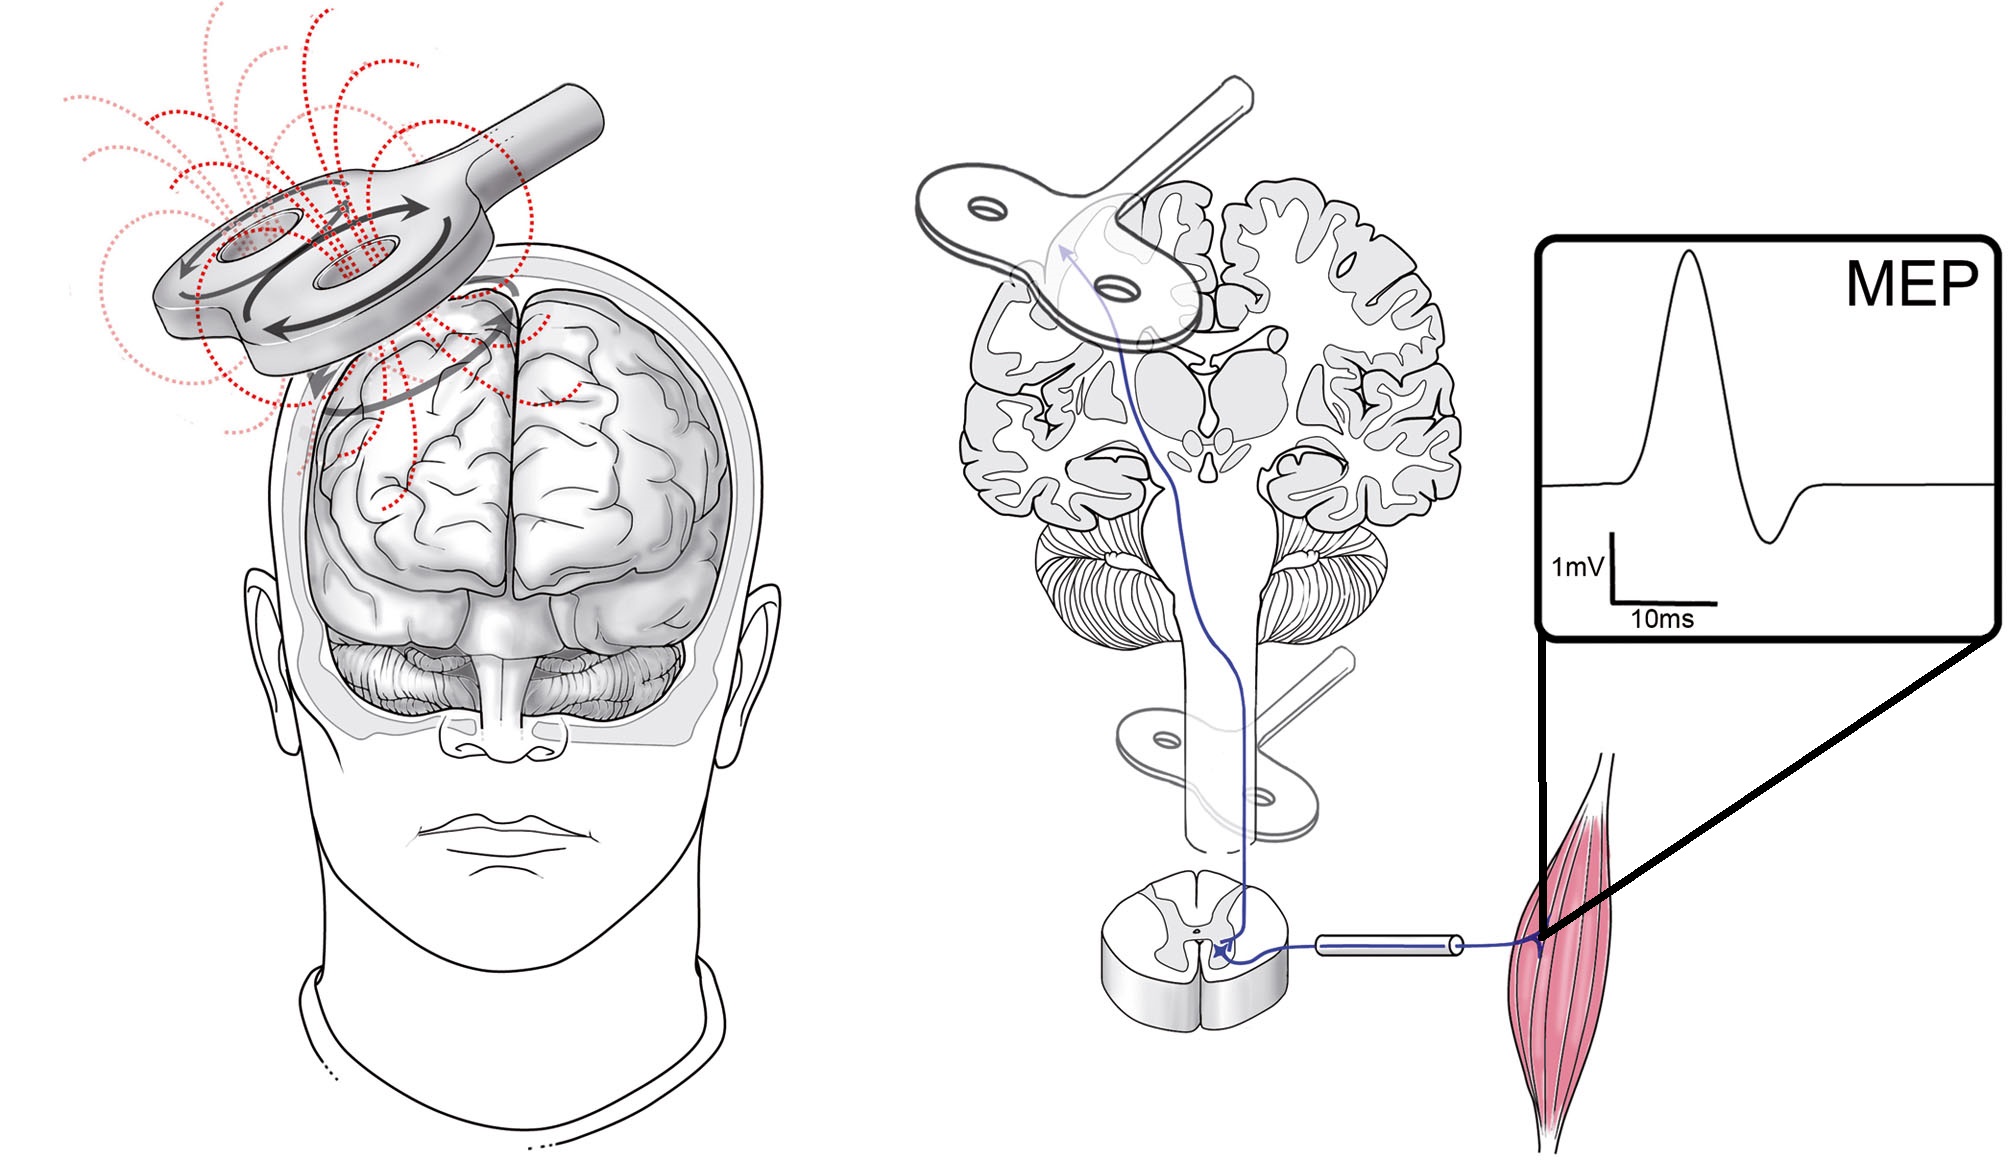 Transcutaneous magnetic stimulation of the brain